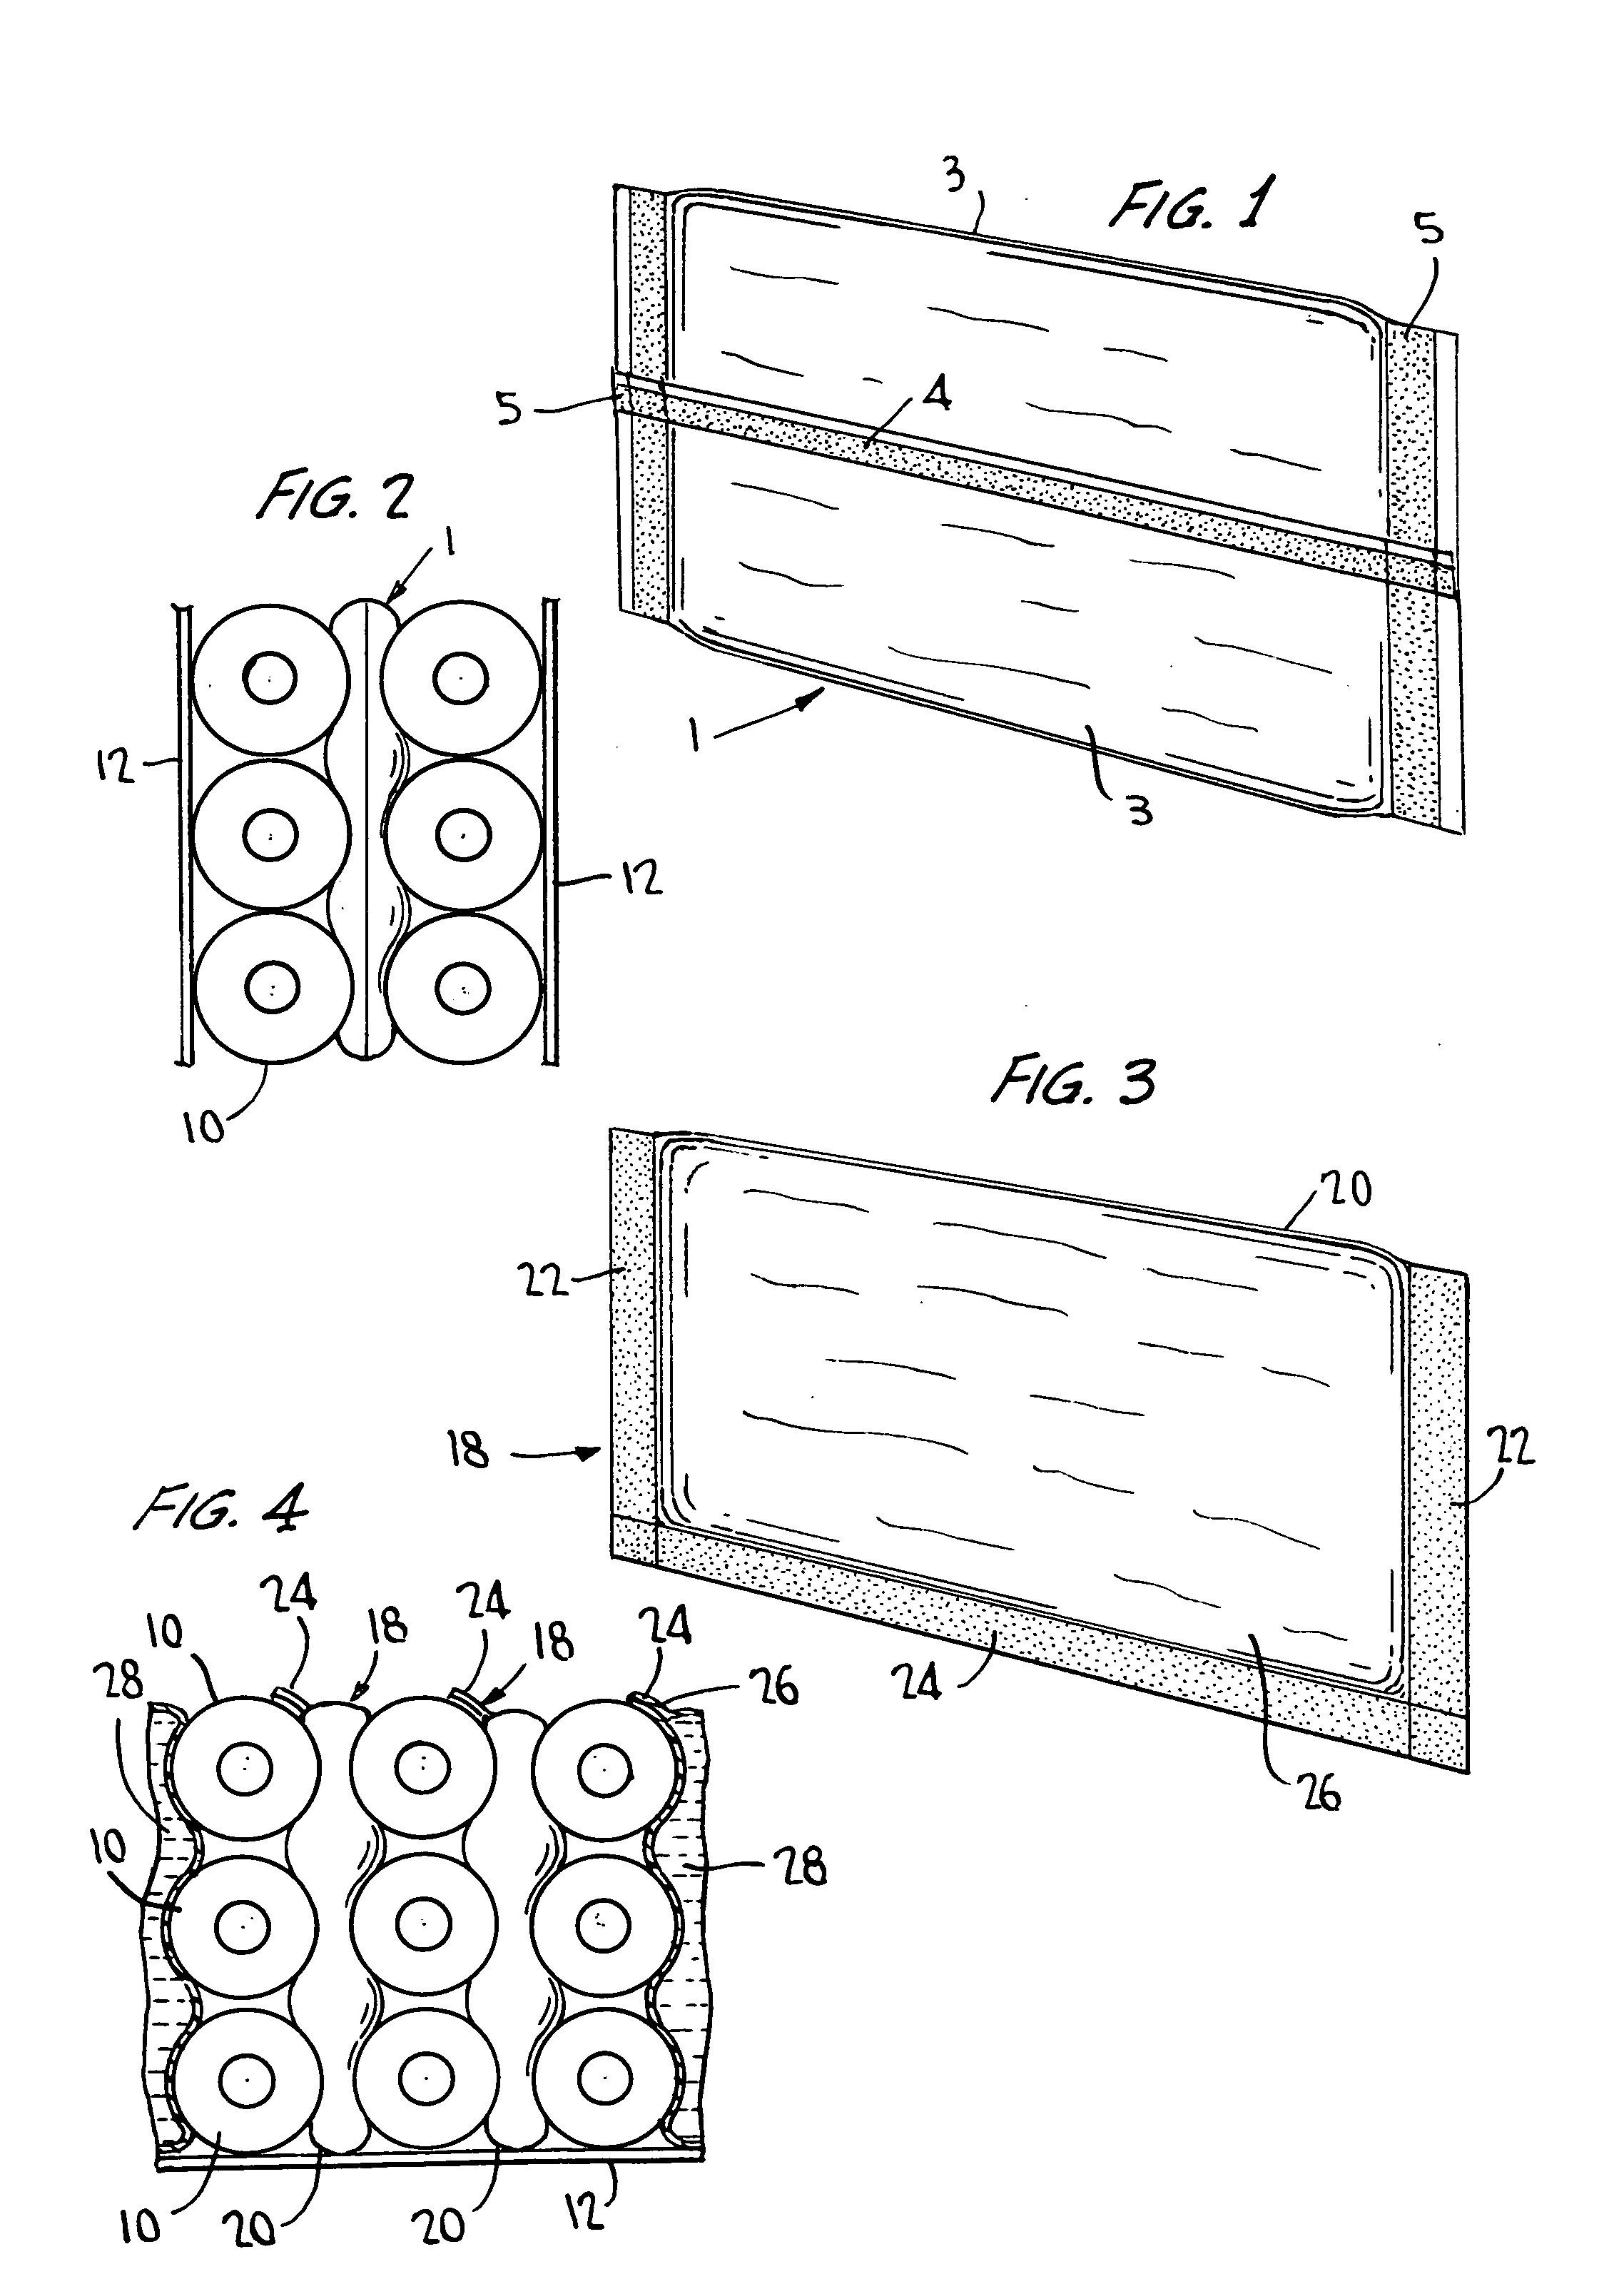 Suppression of battery thermal runaway